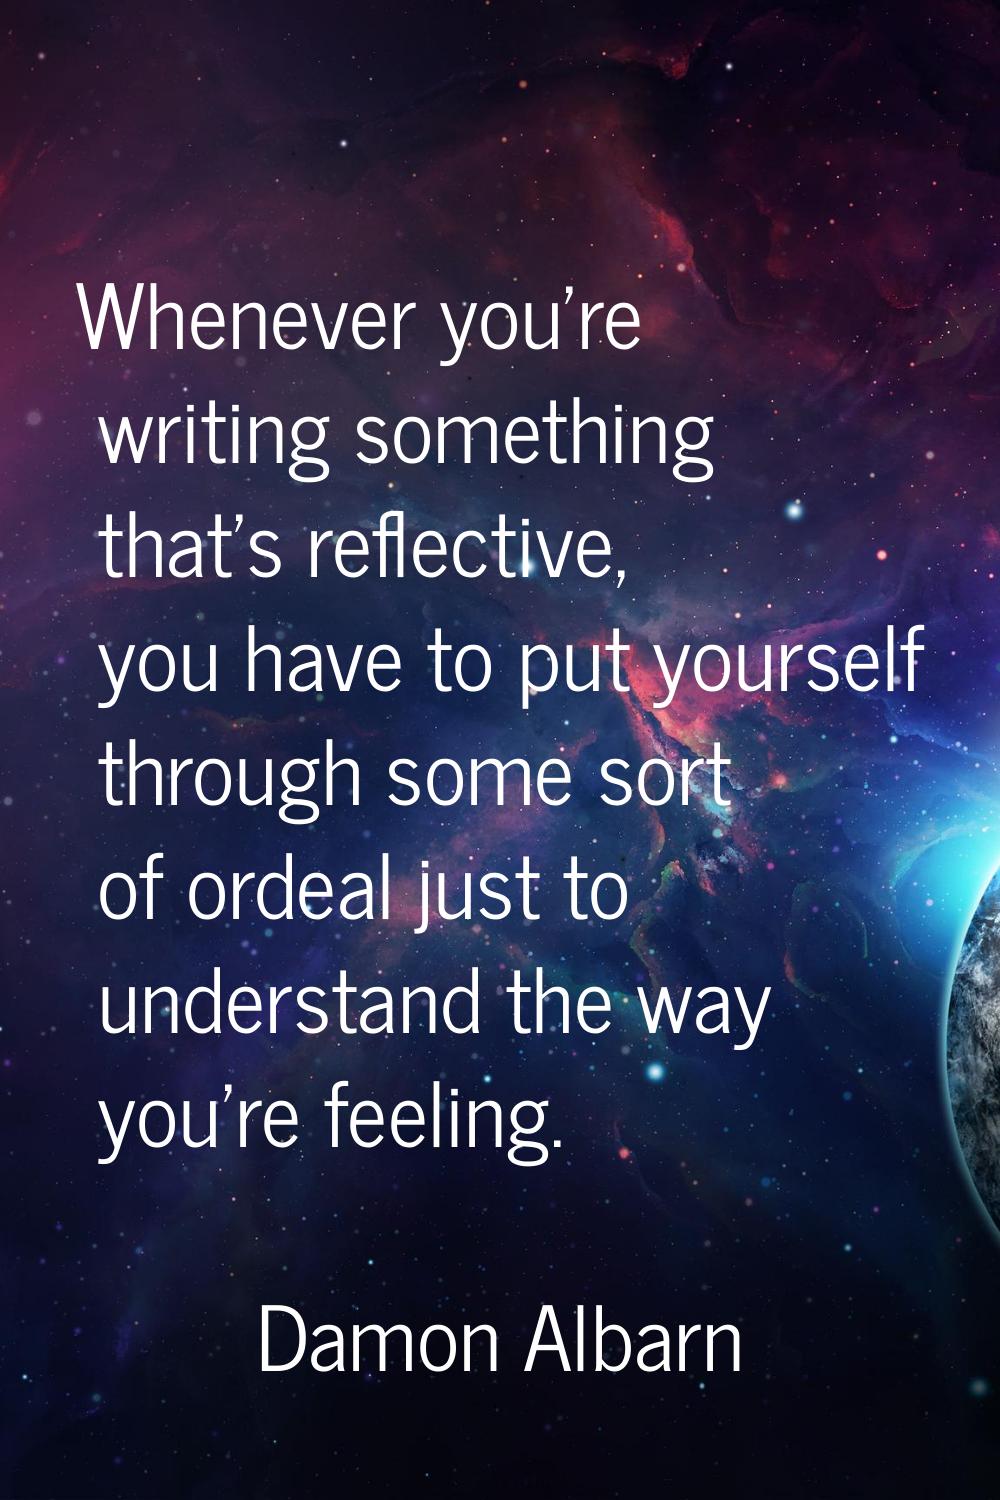 Whenever you're writing something that's reflective, you have to put yourself through some sort of 